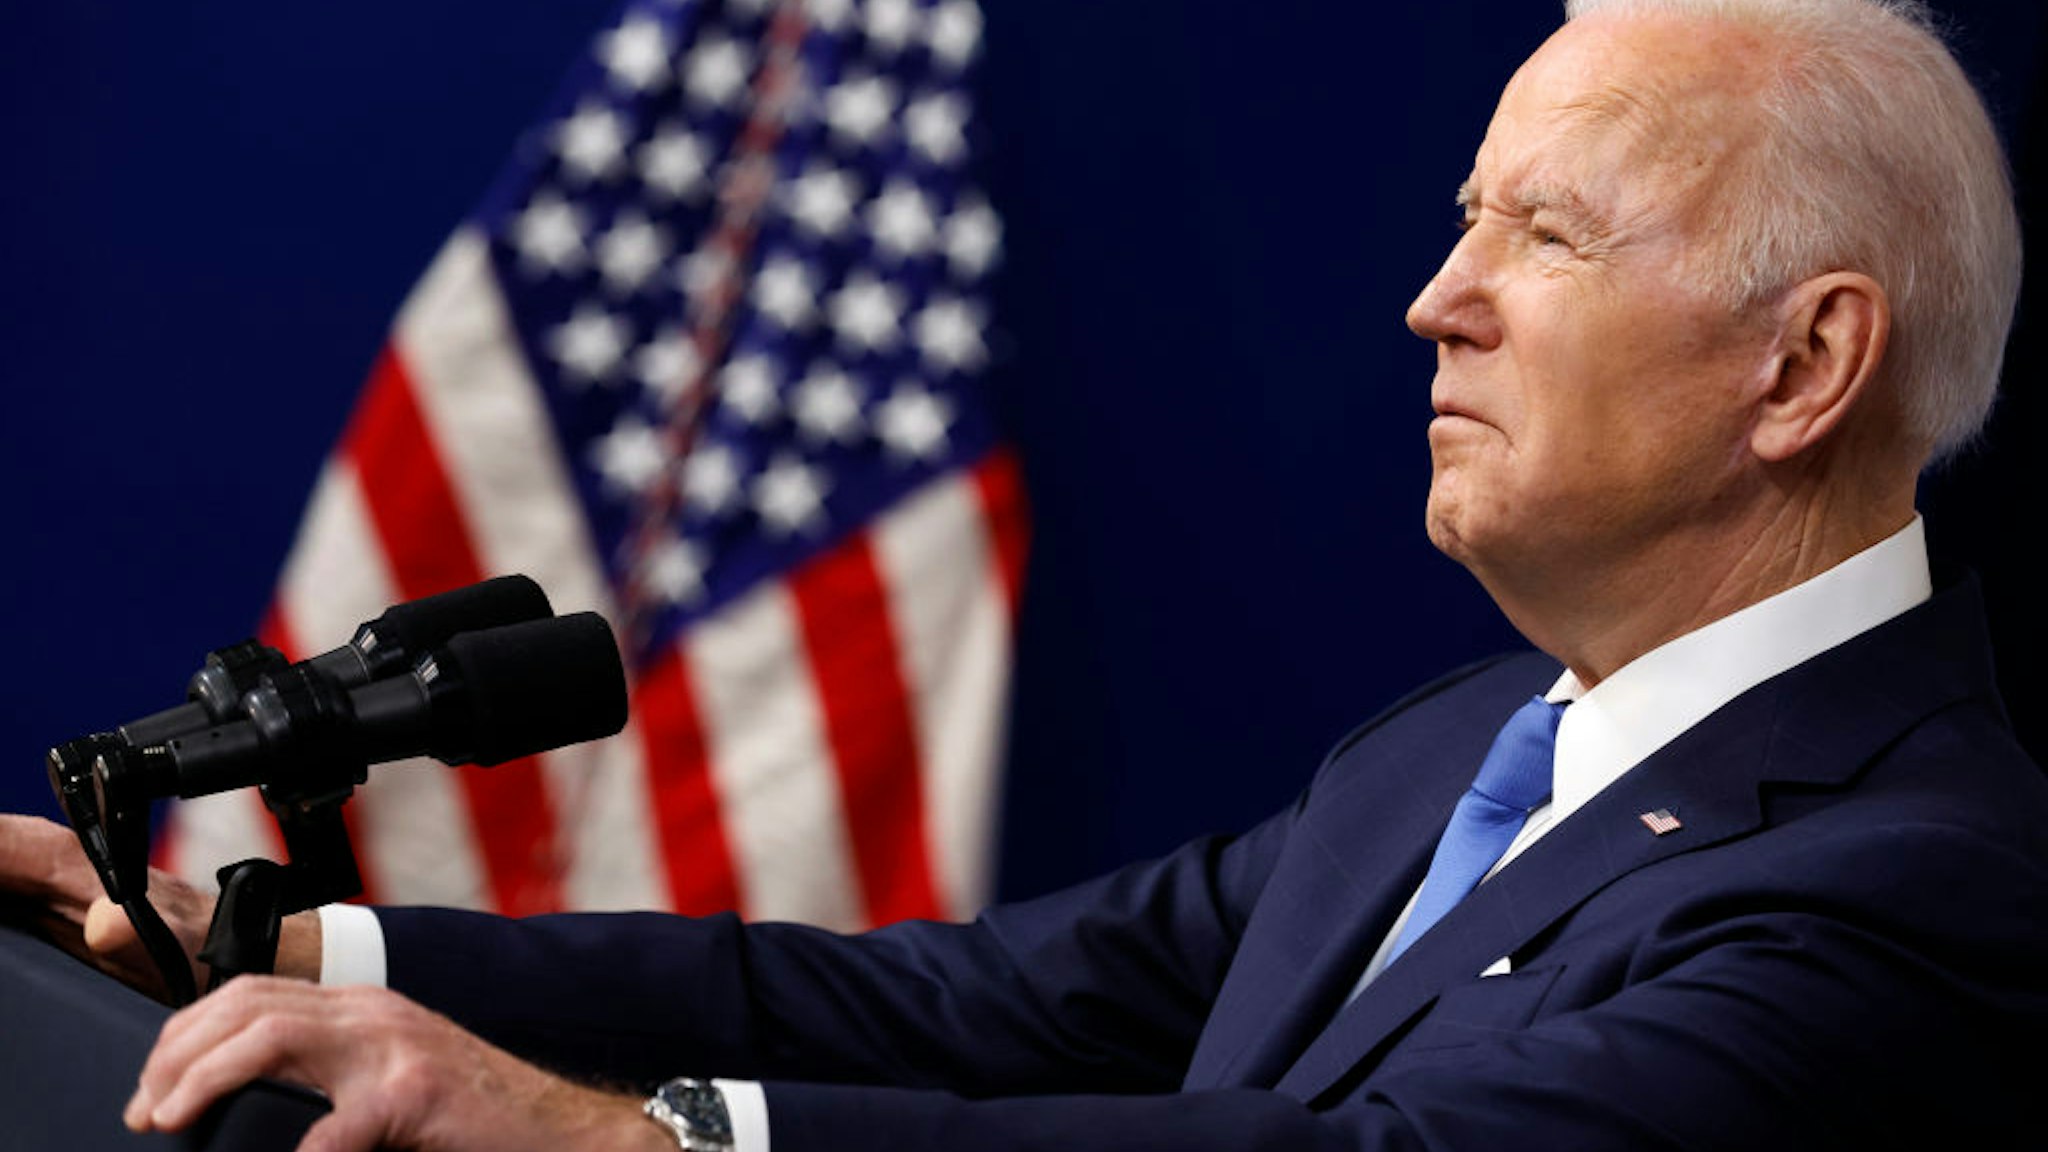 U.S. President Joe Biden delivers remarks about the work being done by his administration to implement the Bipartisan Infrastructure Law in the Eisenhower Executive Office Building's South Court Auditorium on January 14, 2022 in Washington, DC.